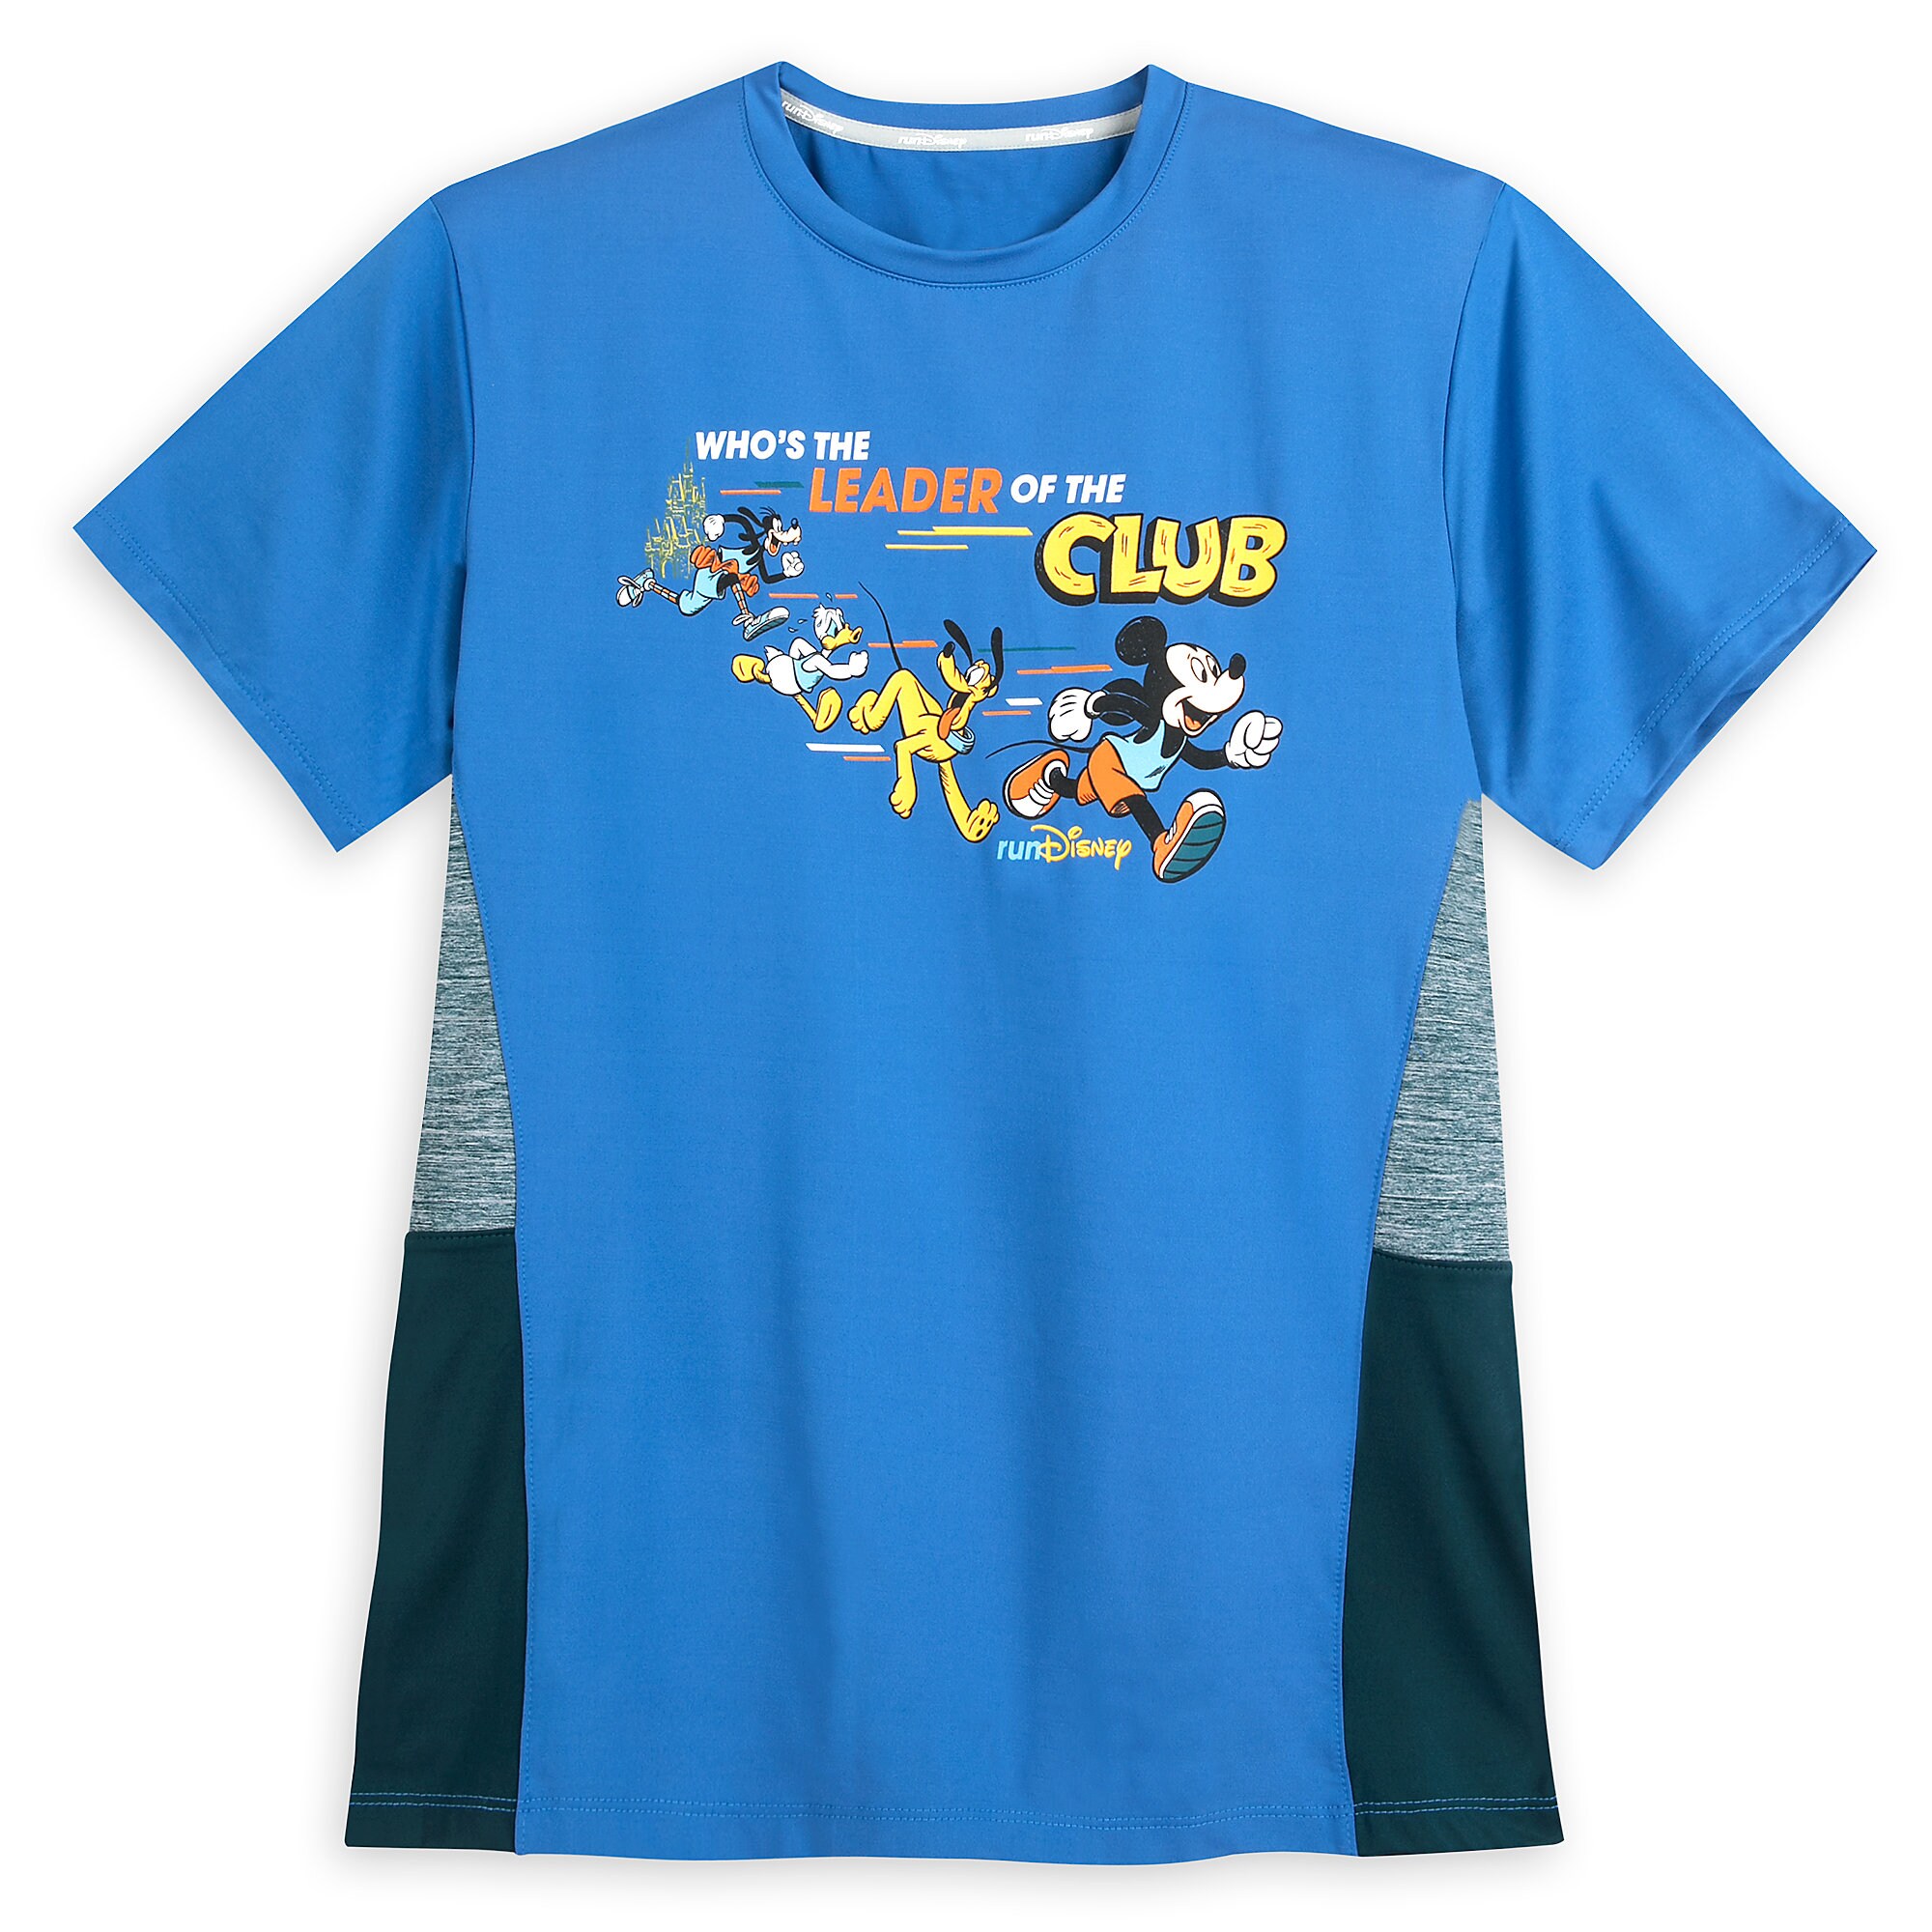 Mickey Mouse and Friends runDisney Performance T-Shirt for Adults